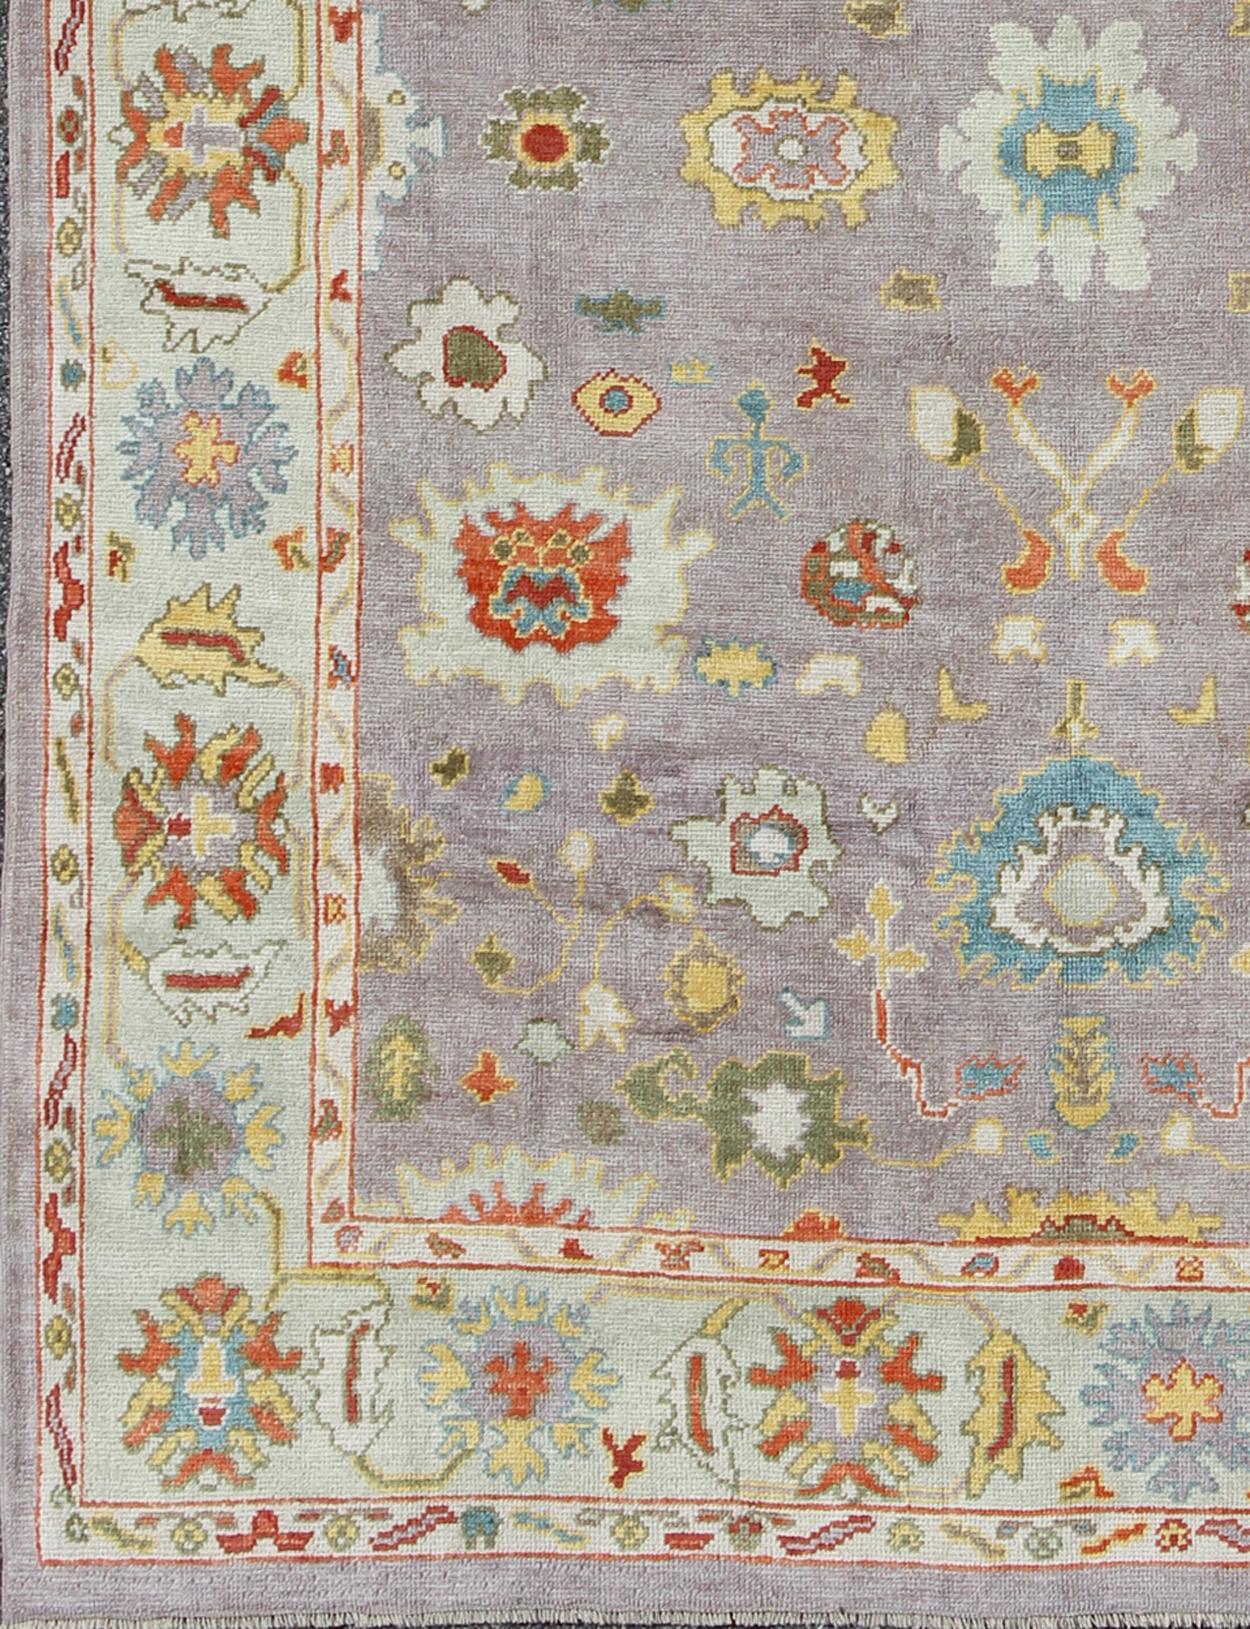 Beautiful Turkish Oushak rug with colorful palette and all-over flower design, Keivan Woven Arts/rug en-165630, country of origin / type: Turkey / Oushak

Measures: 8'2 x 10'5.

This traditional Oushak rug from Turkey features a colorful palette and